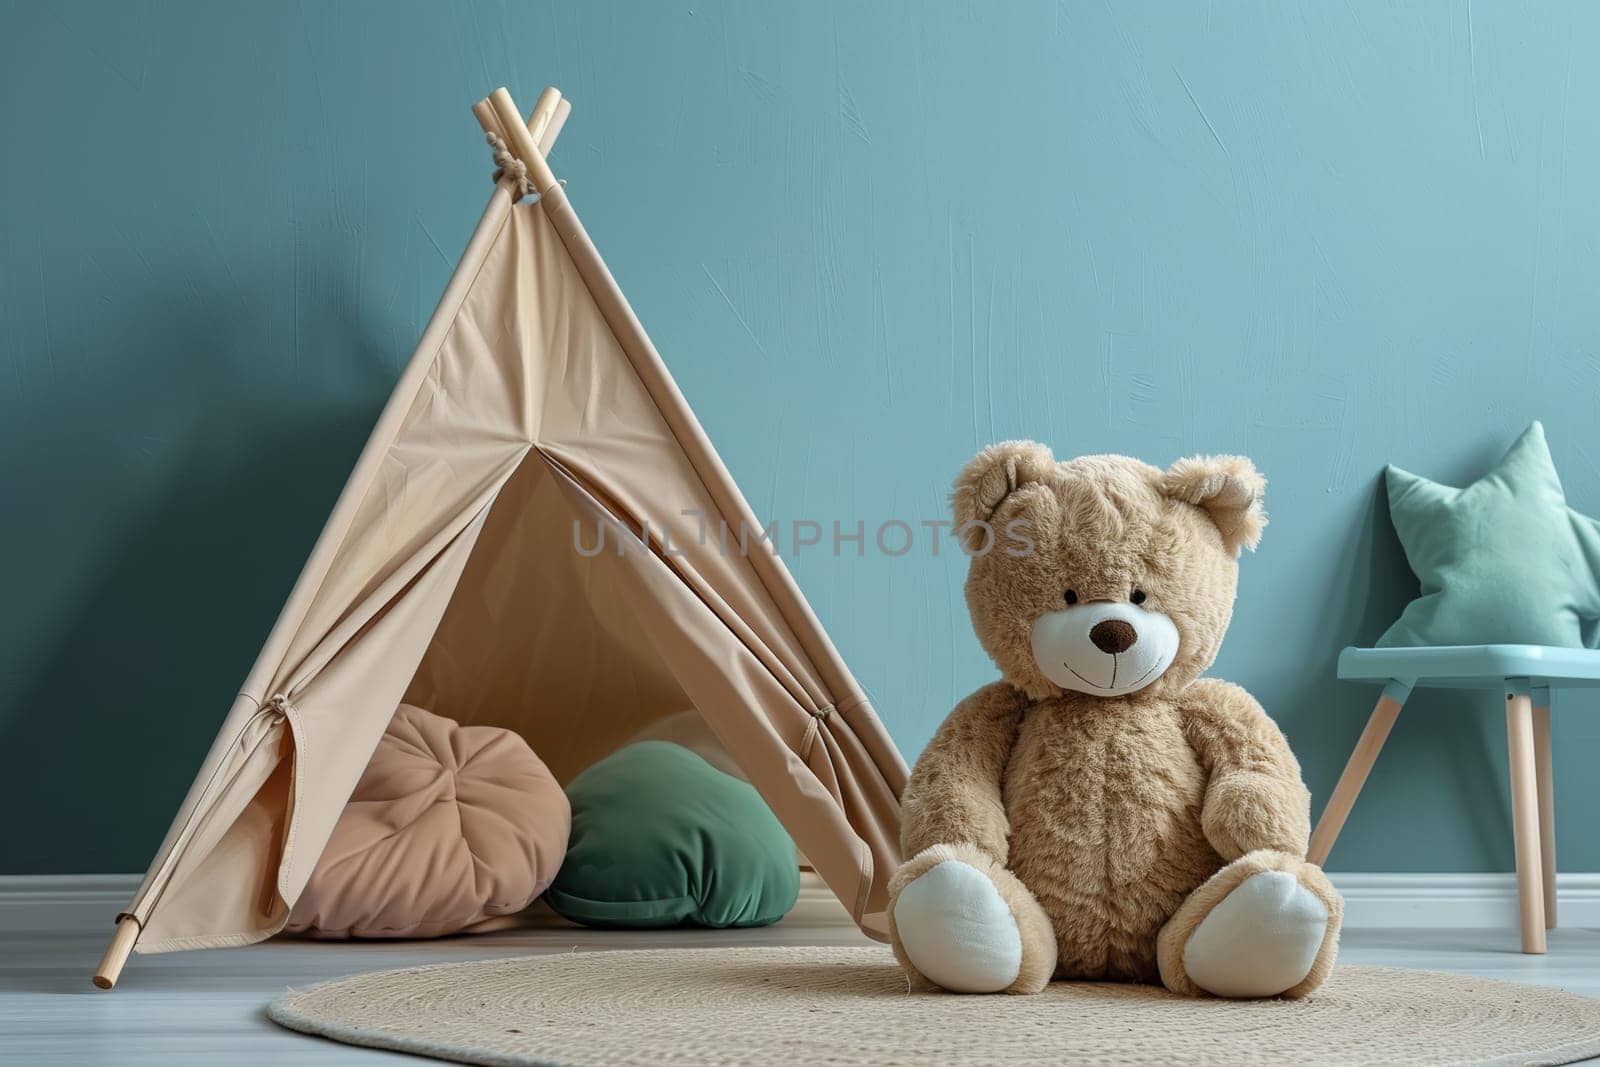 A stuffed toy teddy bear with fur is sitting in front of a wooden teepee in a room, providing comfort and adding a touch of charm with its triangle and rectangle shapes